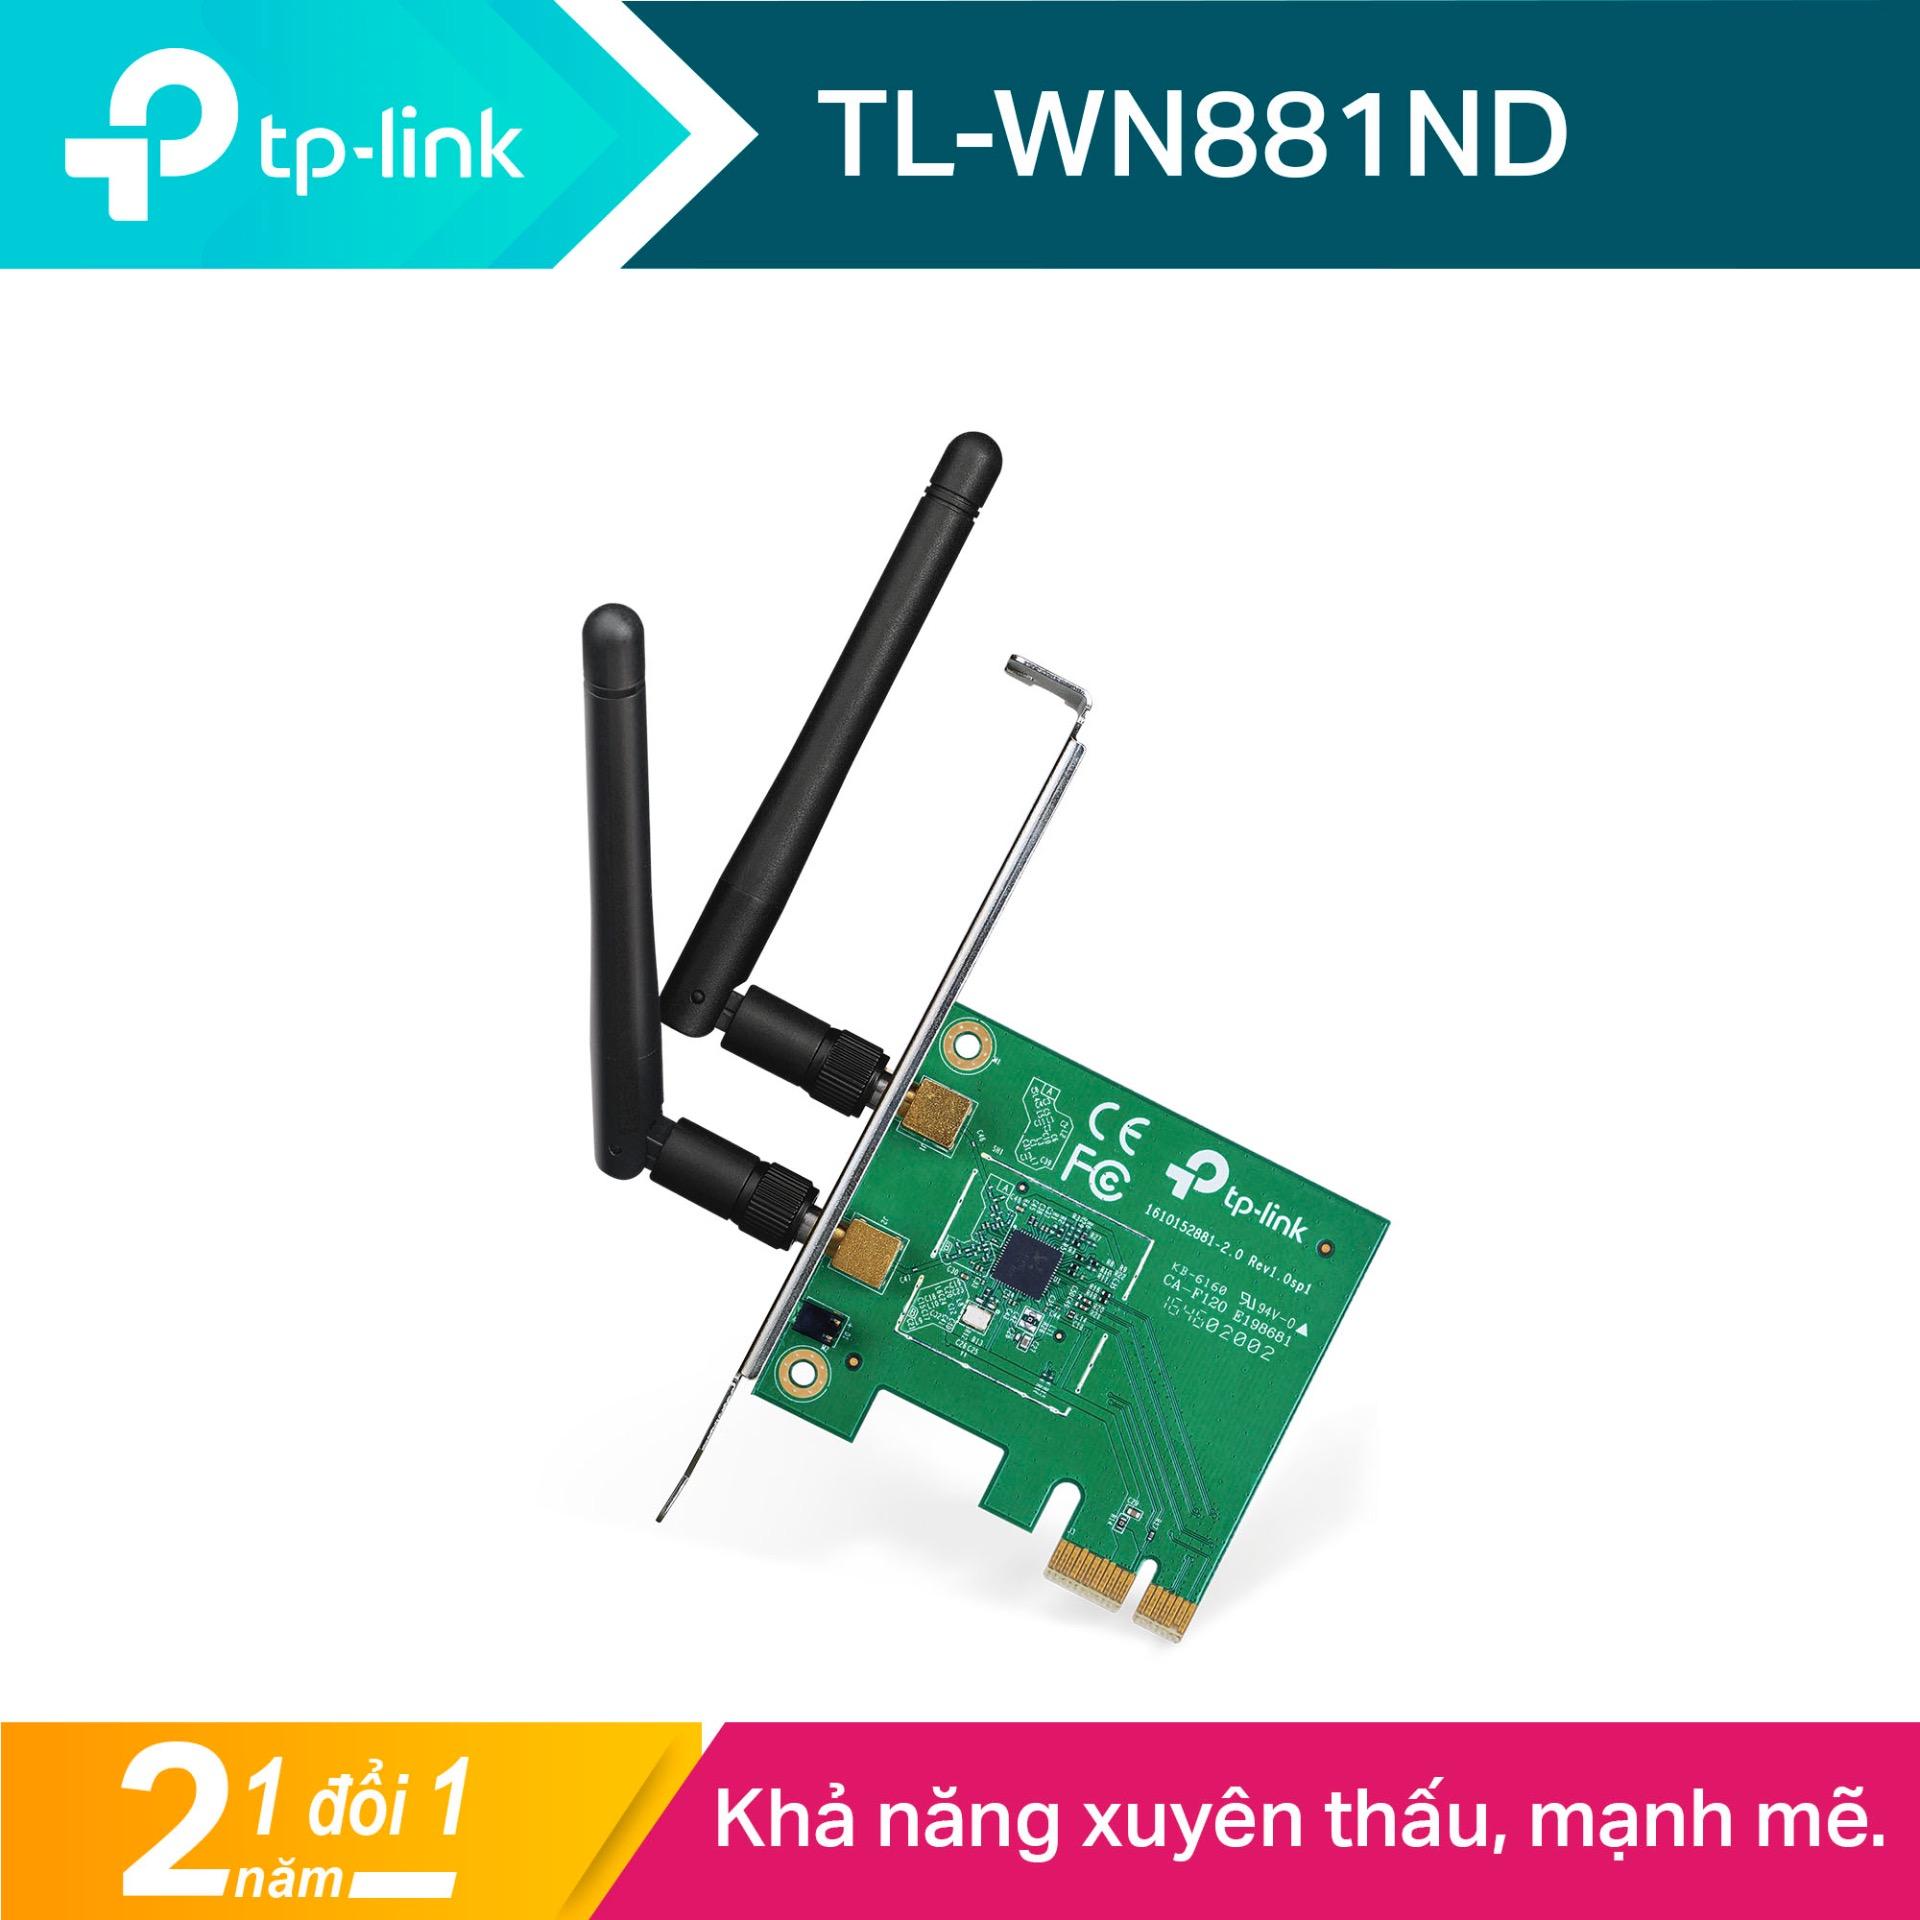 Tl wn881nd. Адаптер TP-link TL-wn881nd. TP-link TL-wn881nd, 300мбит/с. TP link Wireless n PCI Express Adapter. Адаптер Wi-Fi PCI-E TP-link TL-wn881nd 300 Mbps Ташкент.